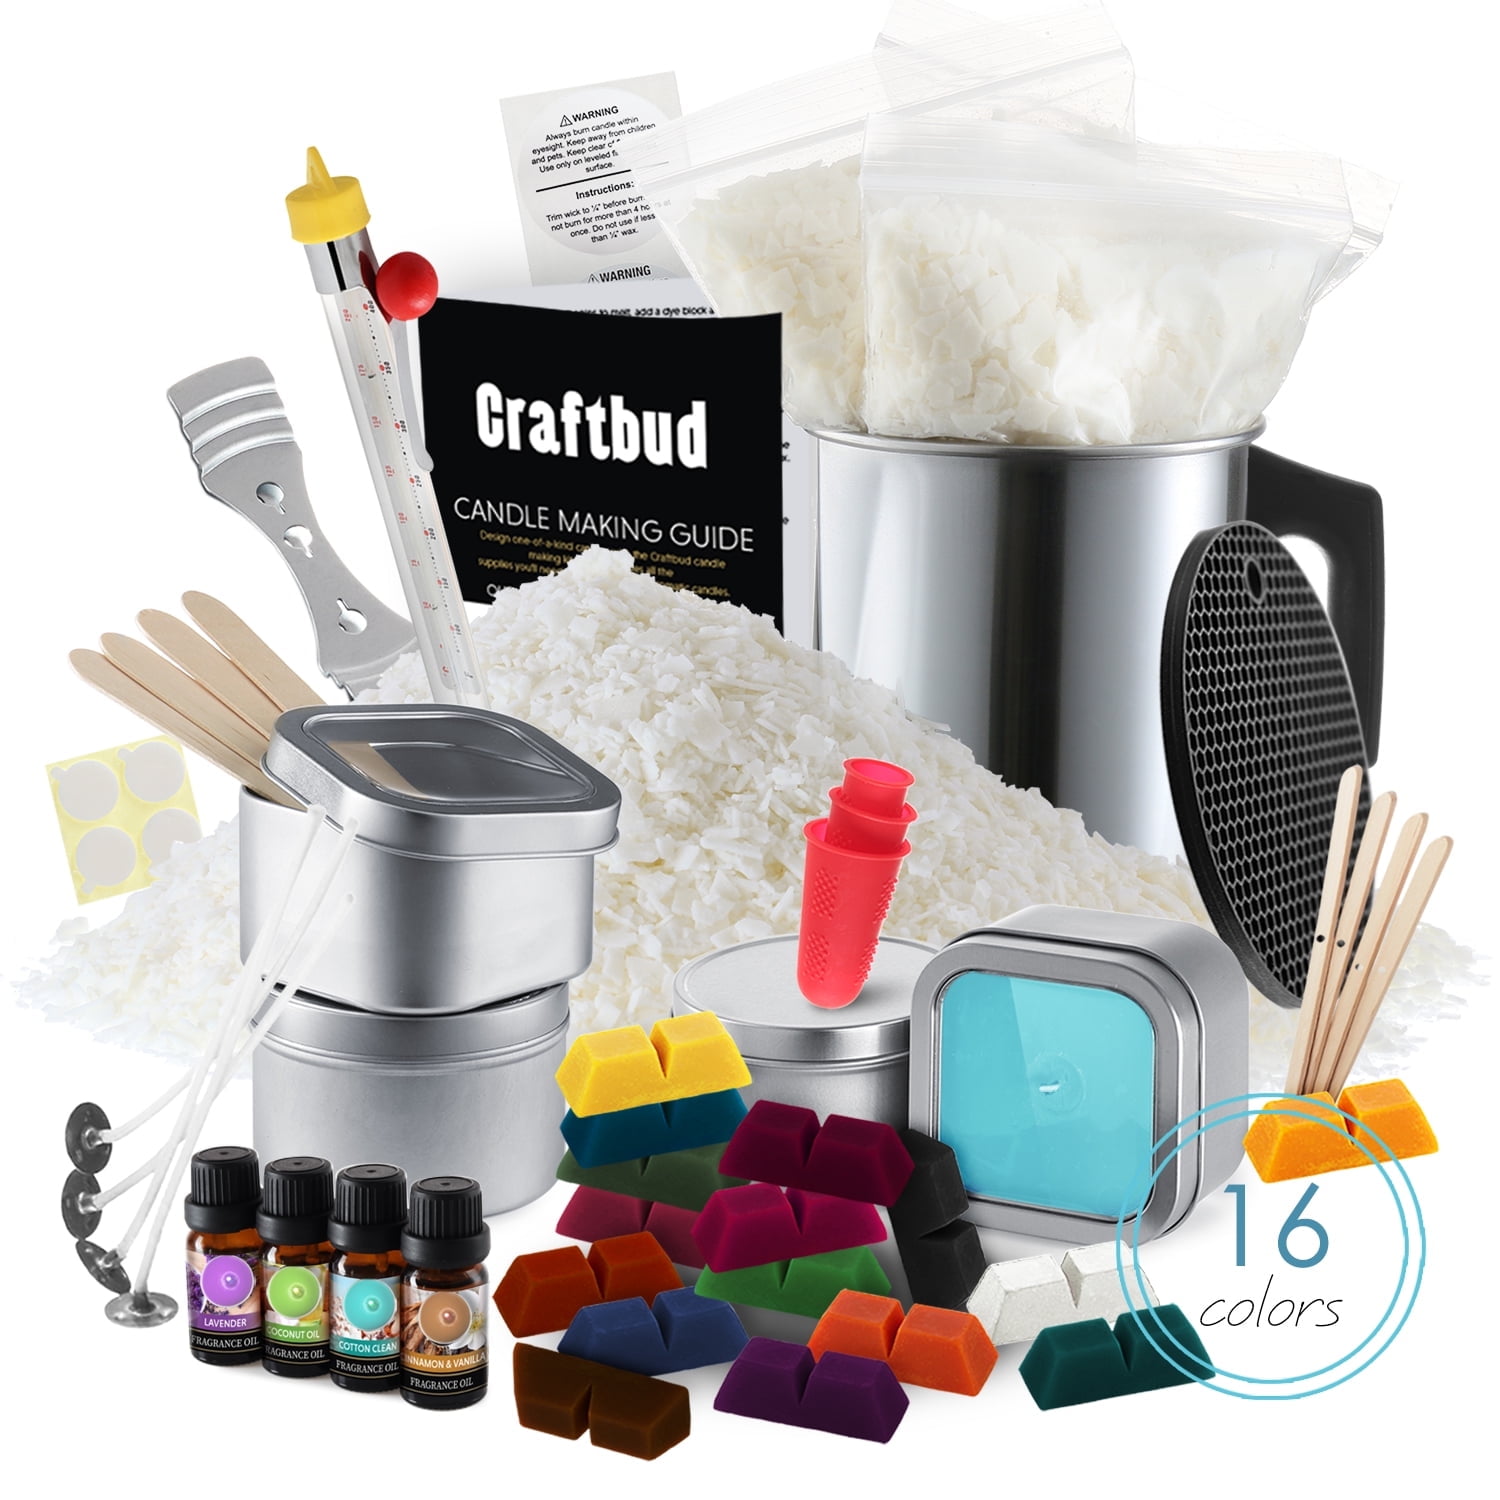  Vutlue Candle Making Kit, Soy Wax Candle Making Kits for  Adults, Beginners, Kids Including Wax, Wicks, 4 Kinds of Scents, Dyes,  Melting Pot, Candle tins- DIY Arts and Crafts Candles Making